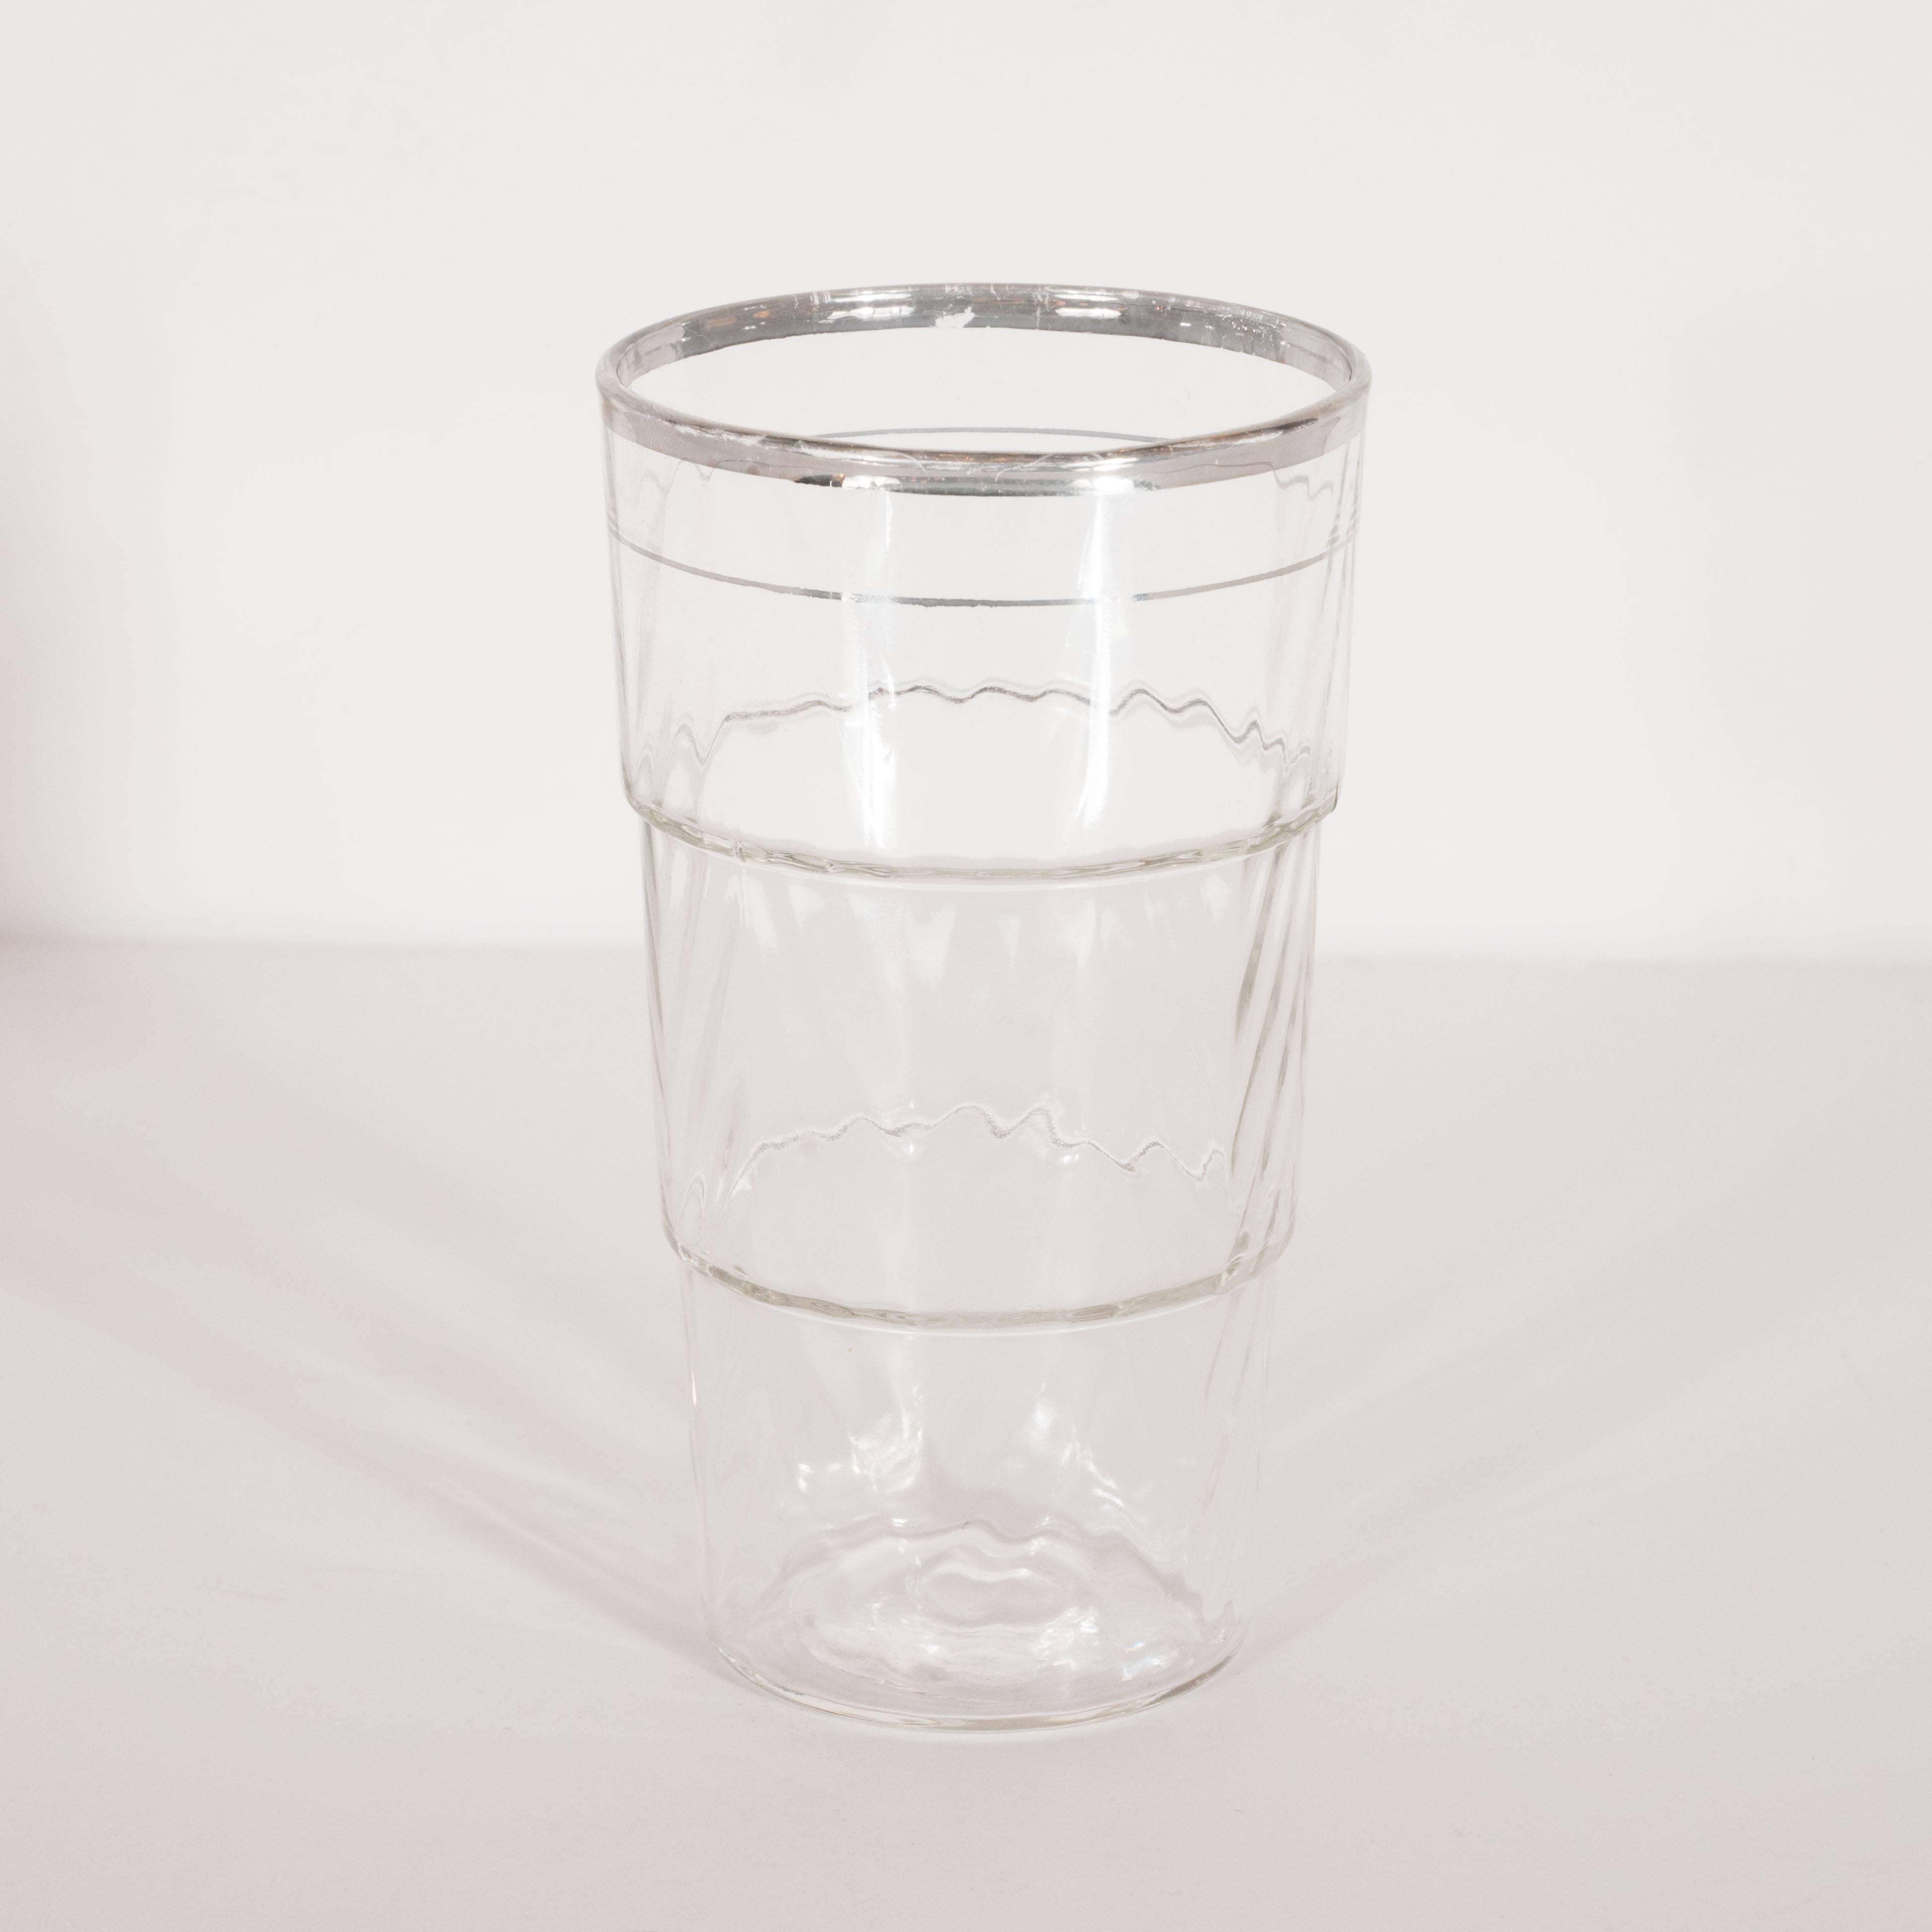 This elegant set of four glasses were realized in the United States, circa 1935. They offer a skyscraper style design composed of three tiers of ascending diameter in textured glass with subtle raised angular ridges that suggest a chevron pattern.